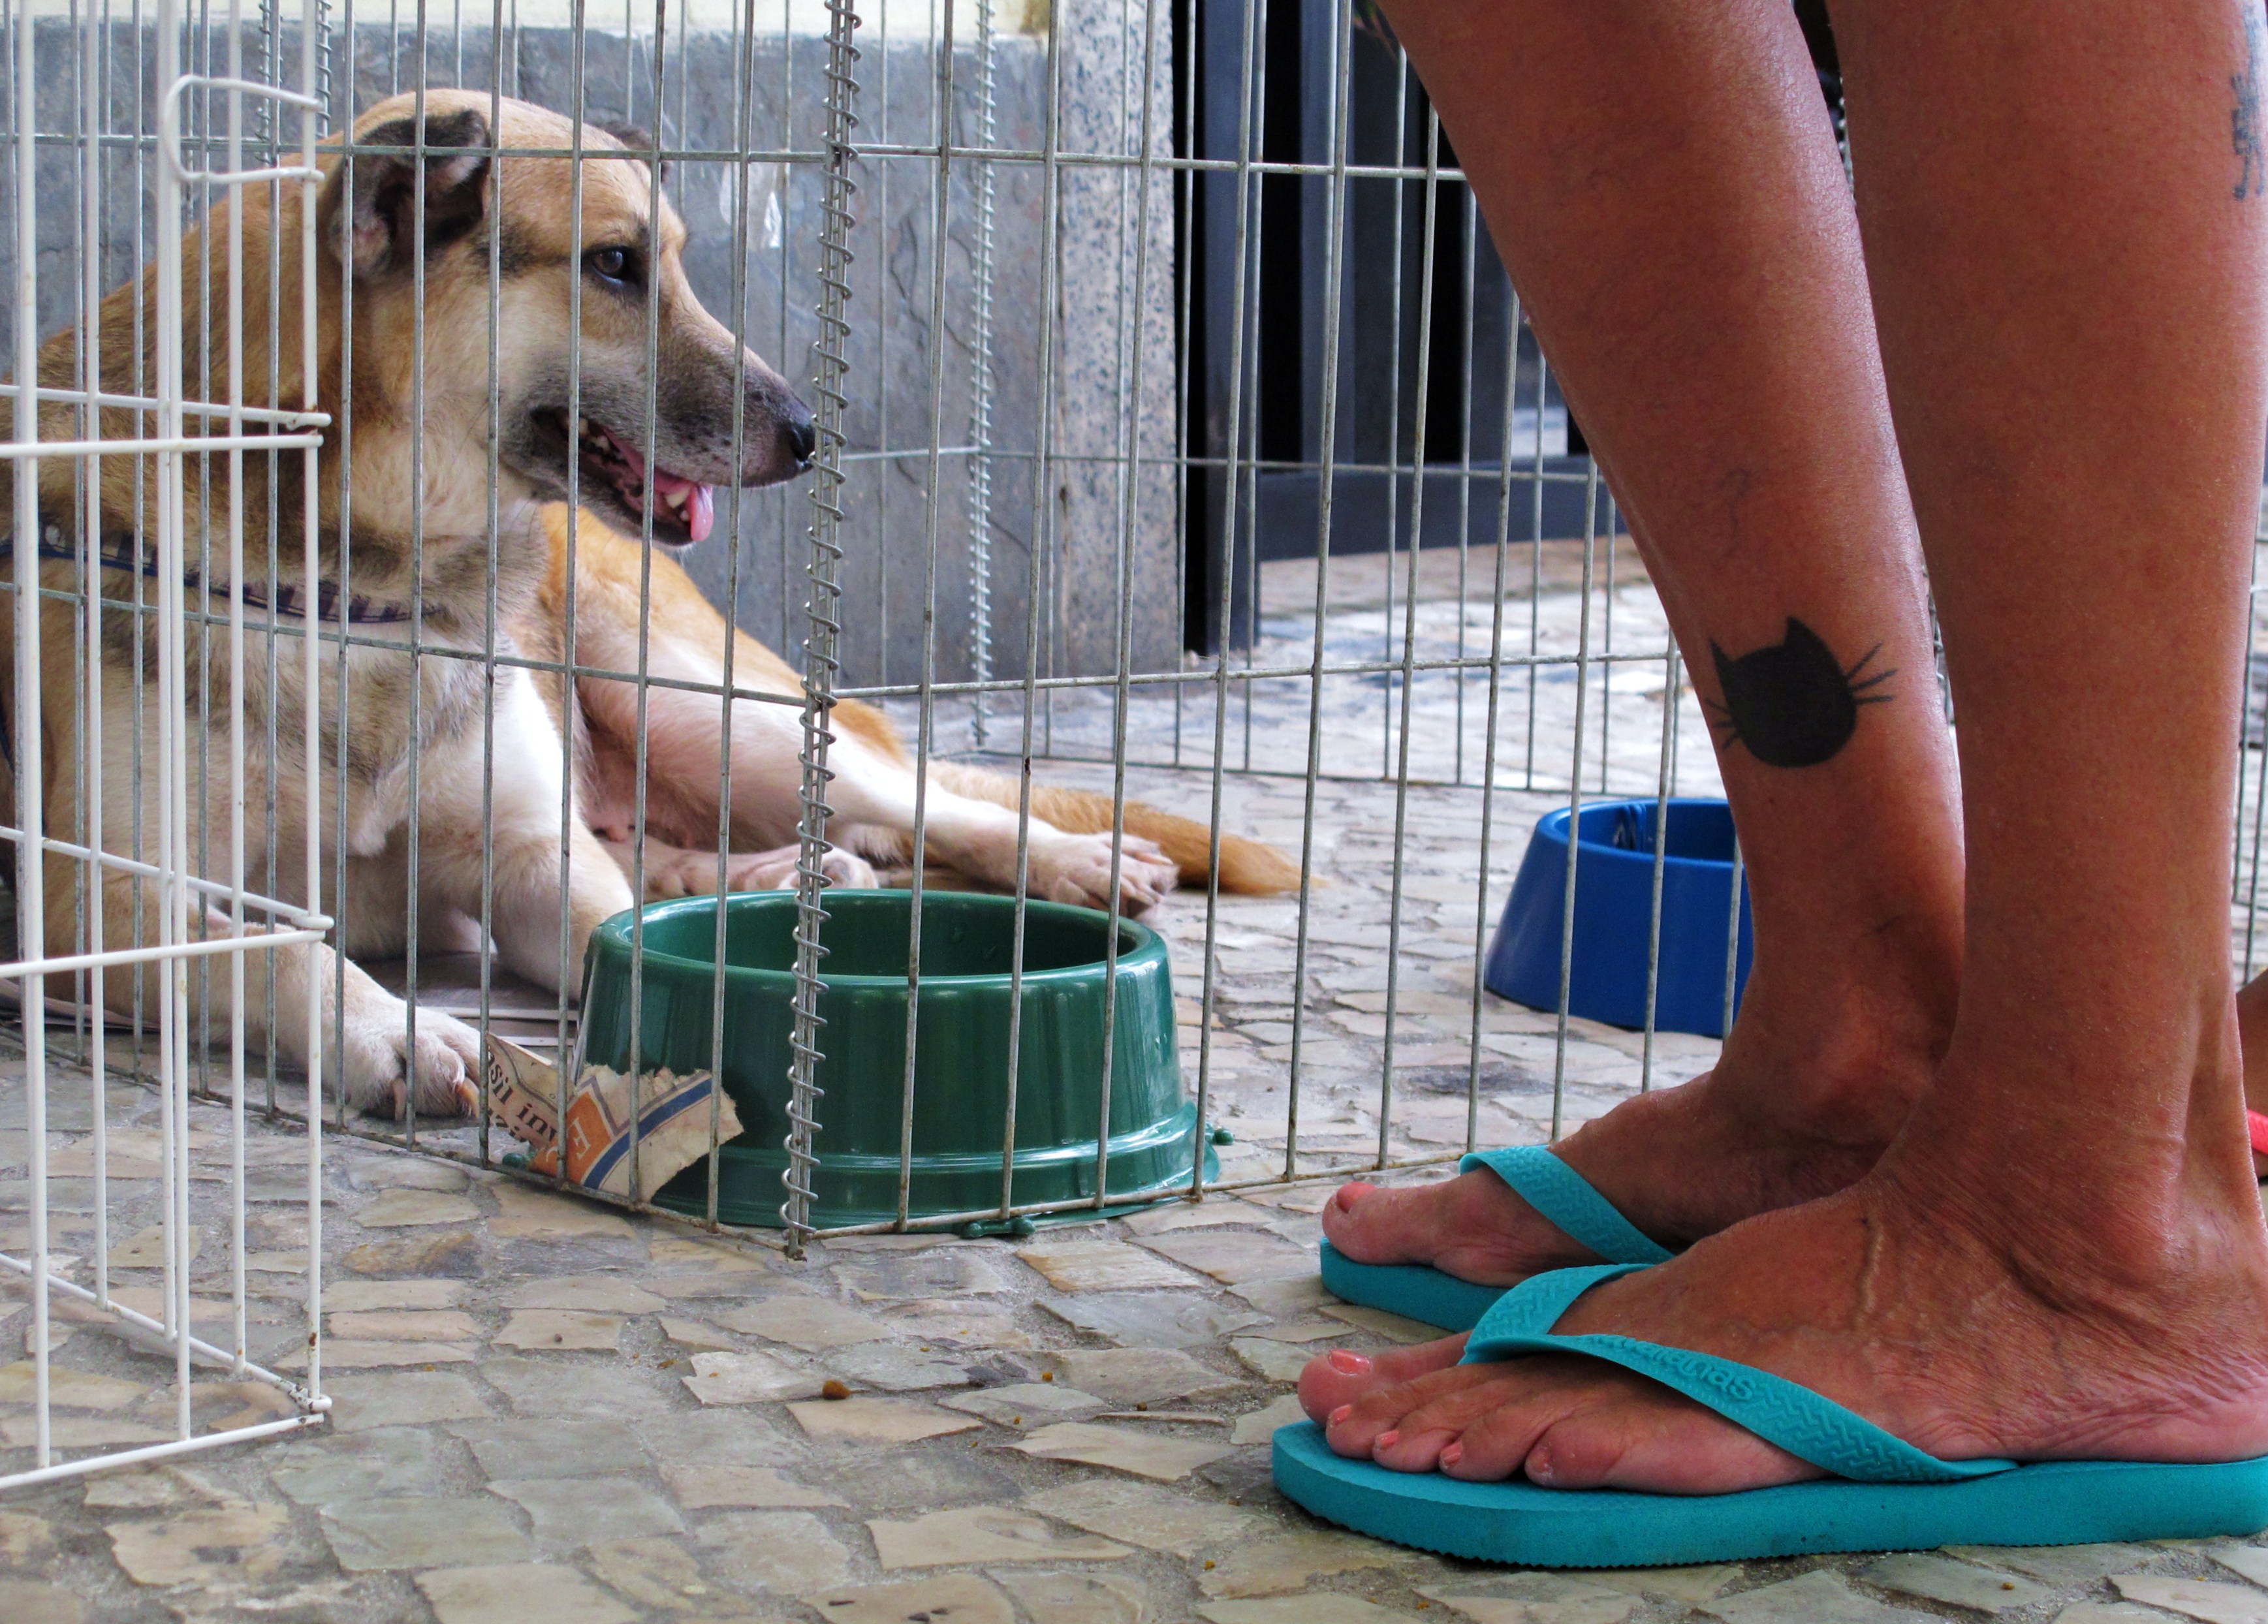 Dogs sit and wait for a home at an adoption event in Copacabana, photo courtesy of Candy Pilar Godoy